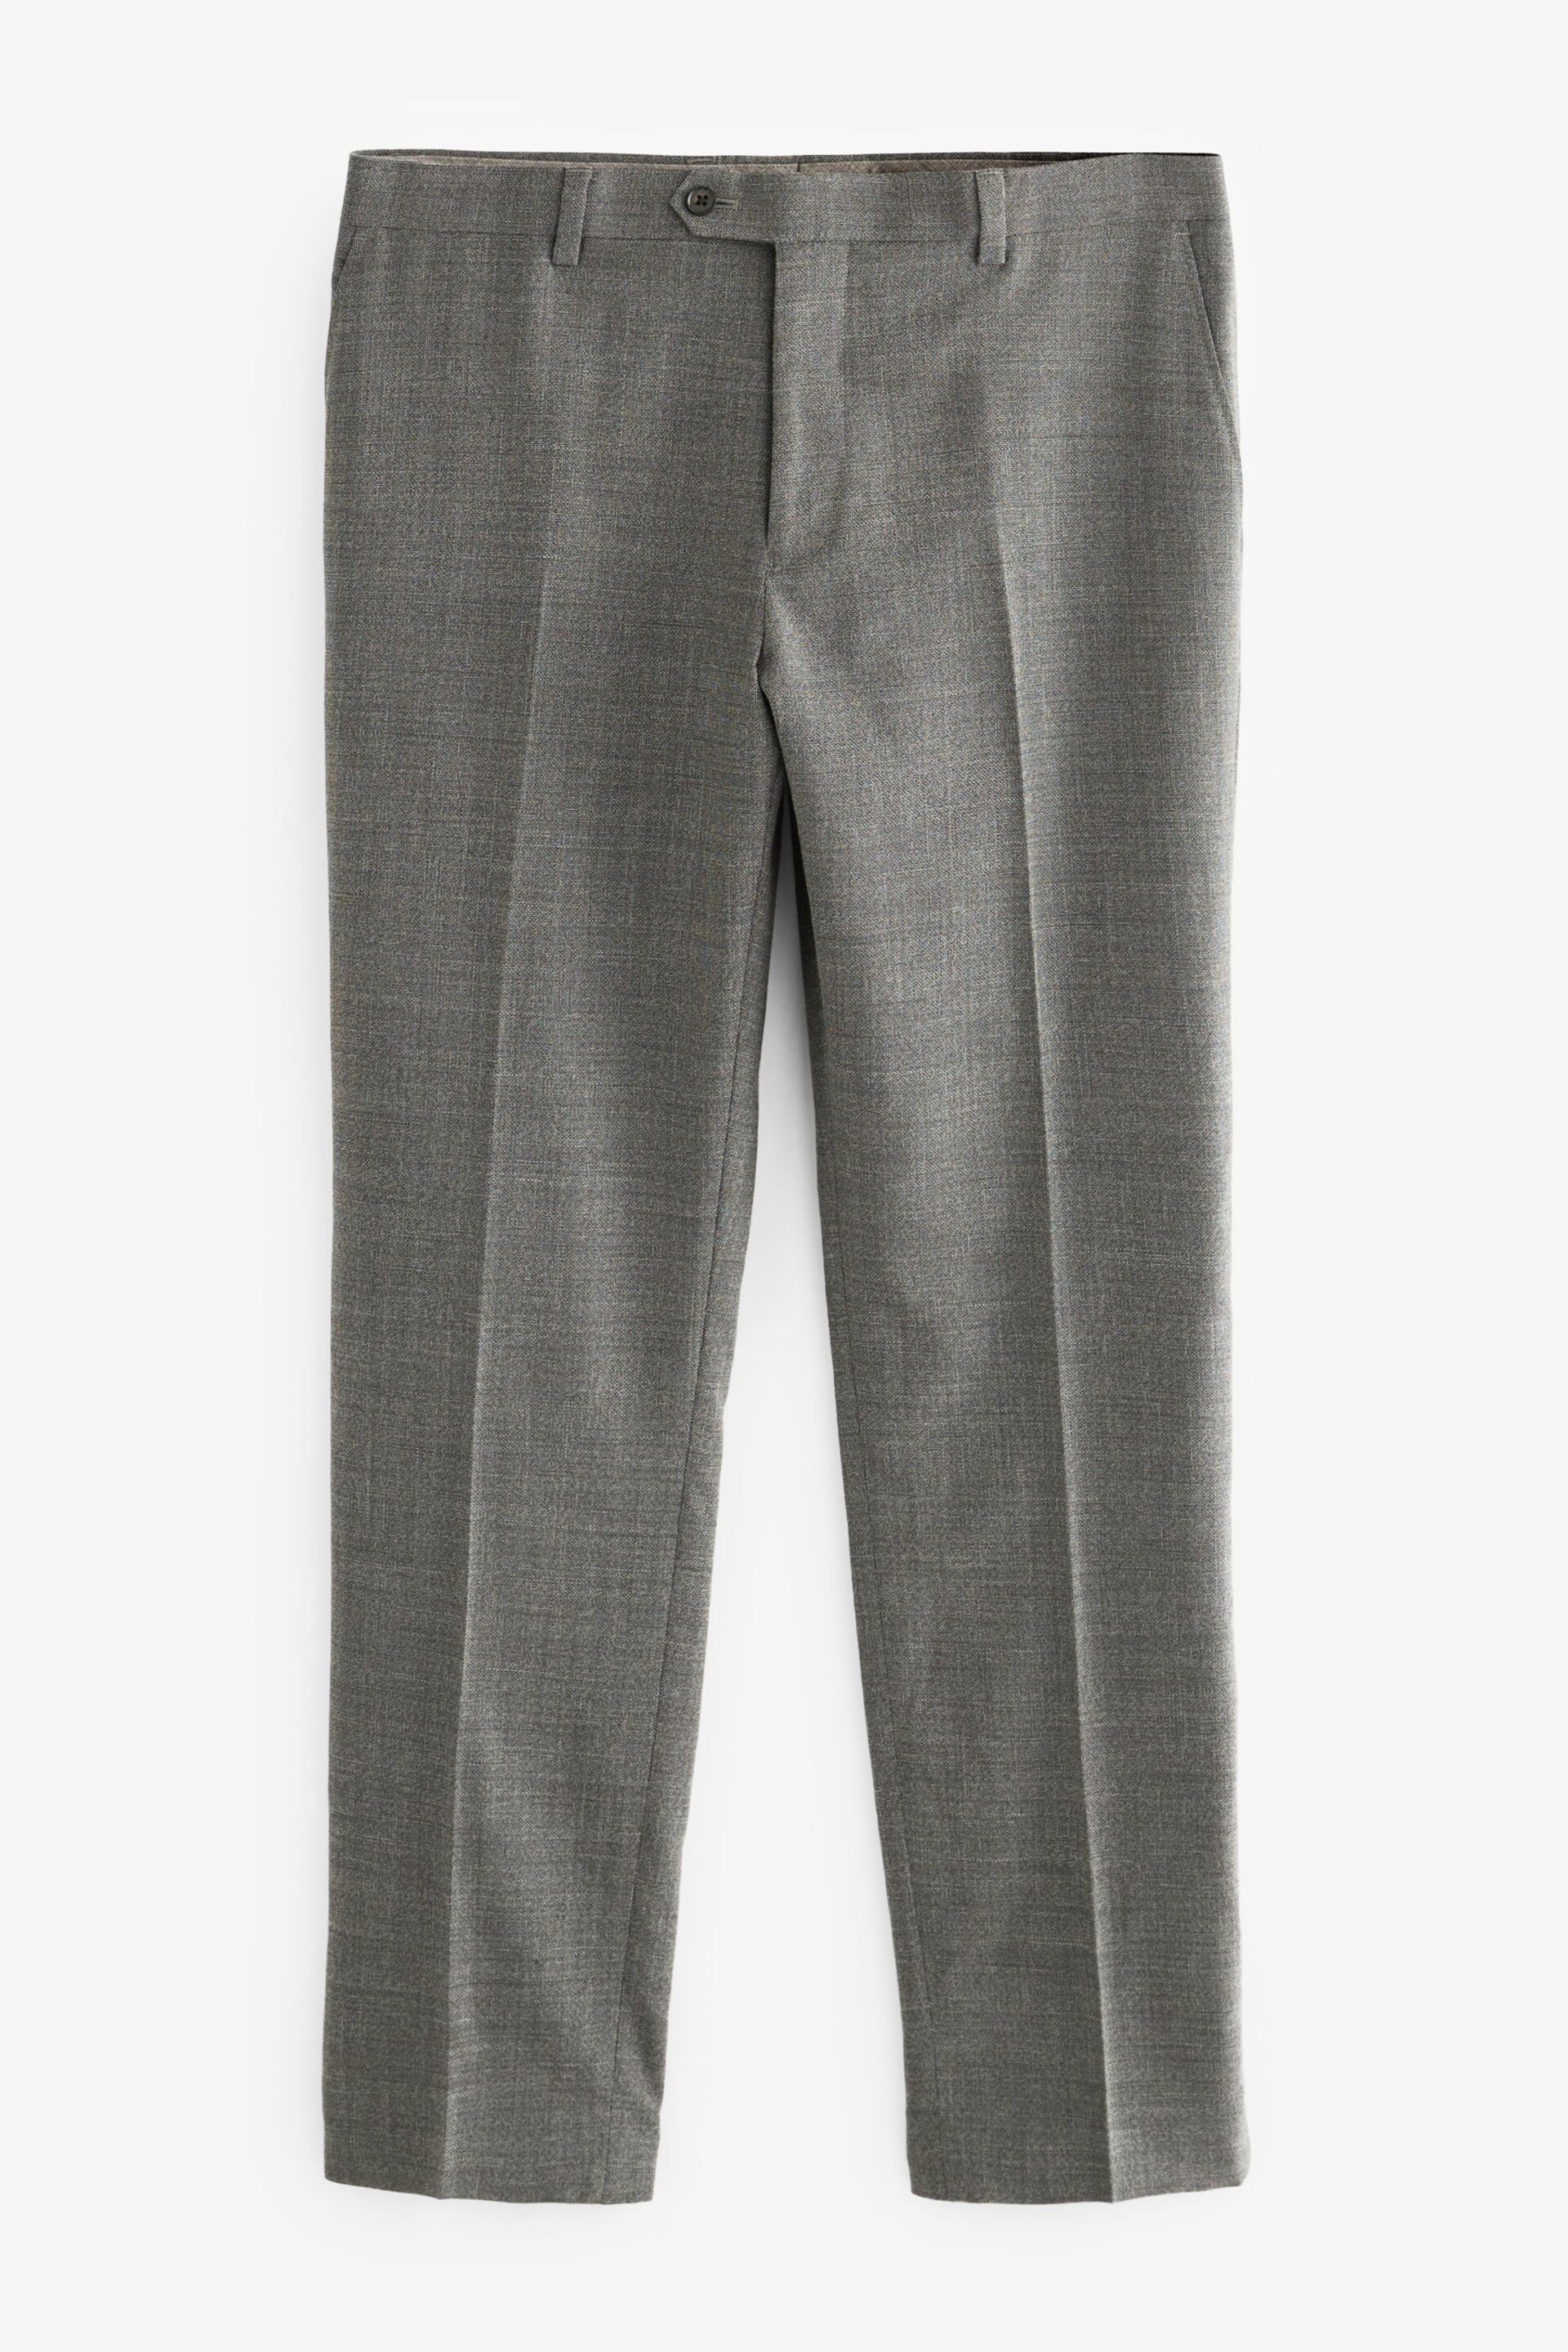 Grey Slim Fit Signature Marzotto Italian Fabric Textured Suit: Trousers - Image 7 of 11